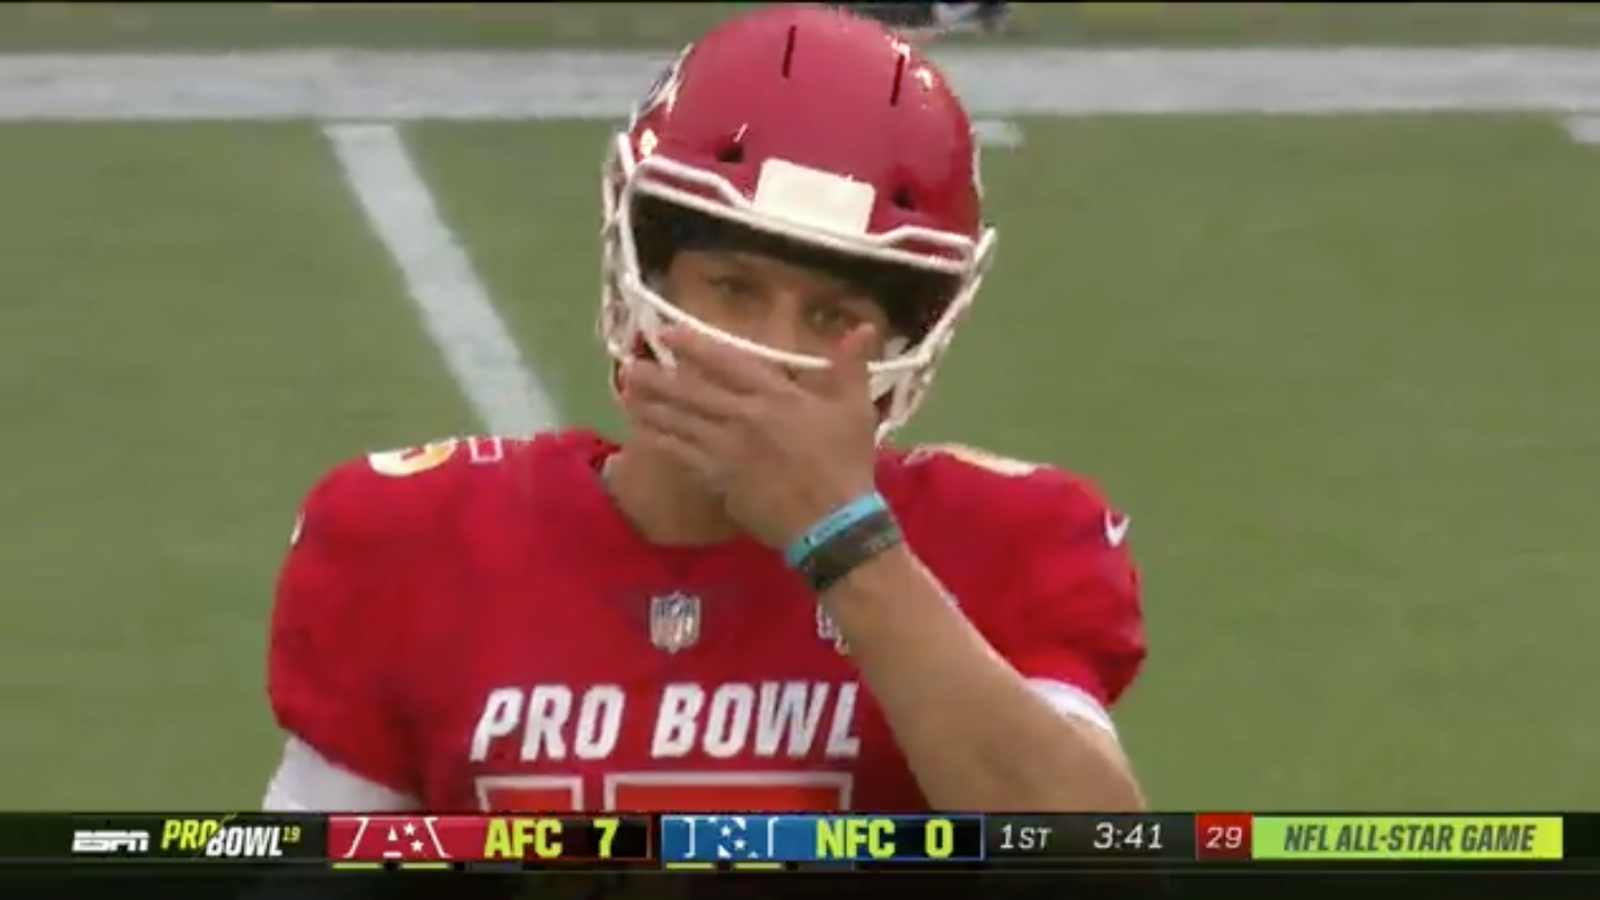 Patrick Mahomes Cared Enough About His Pro Bowl Performance To Drop An F-Bomb On Live TV